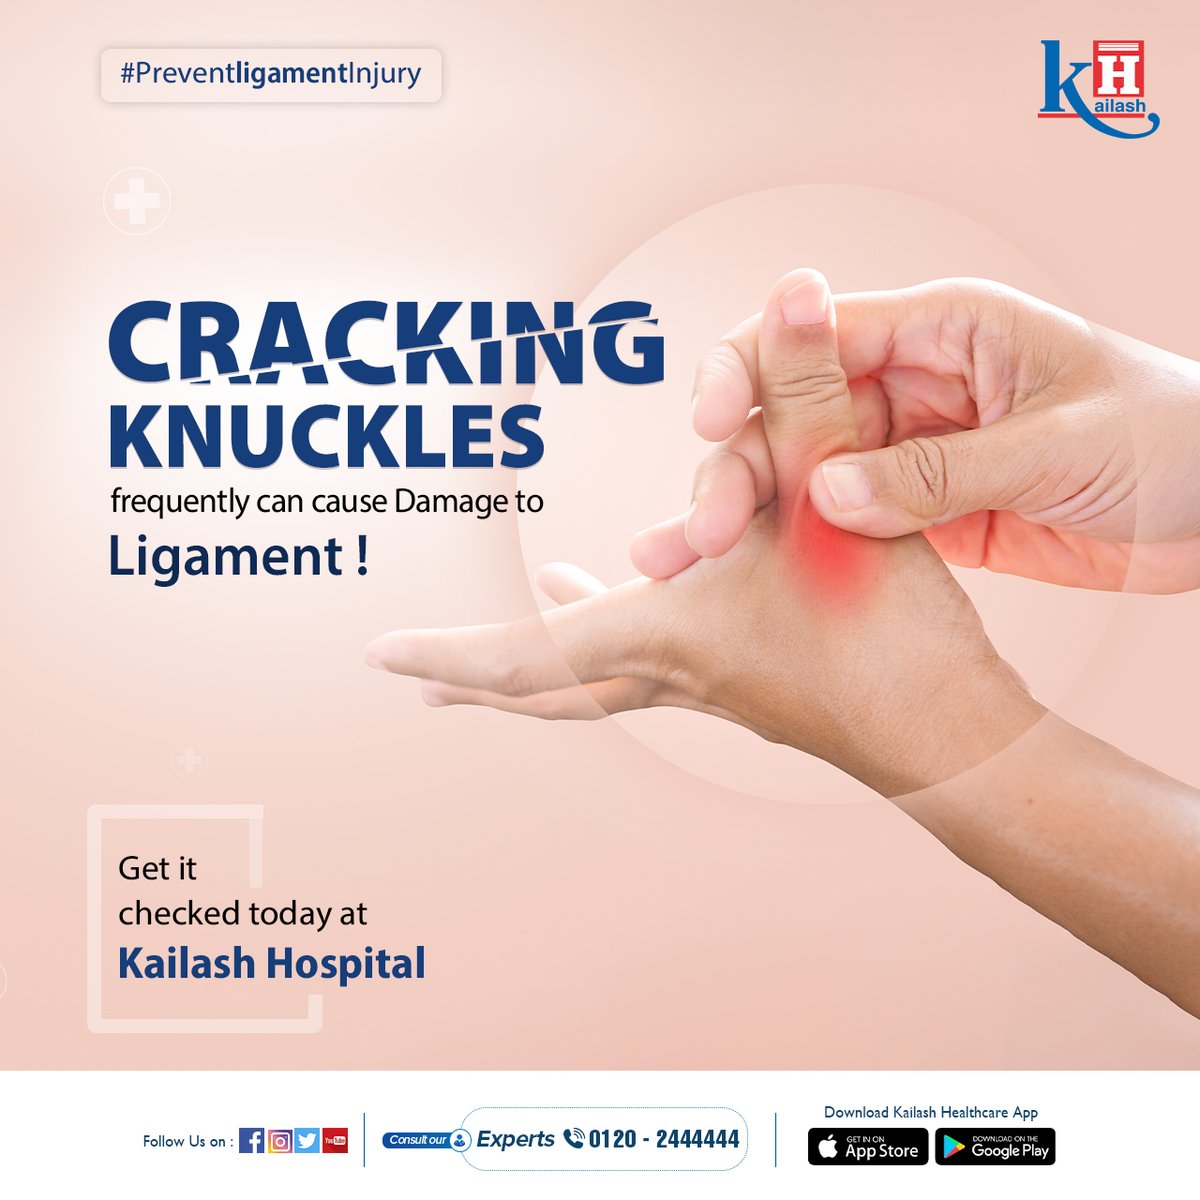 Do you crack your knuckles too?

Beware! it is really affecting your finger joints you aren't aware of.
Consult our Ortho Specialists: kailashhealthcare.com

#fingercracking #ligamentdamage #orthocare #jointfracture #OrthoExperts